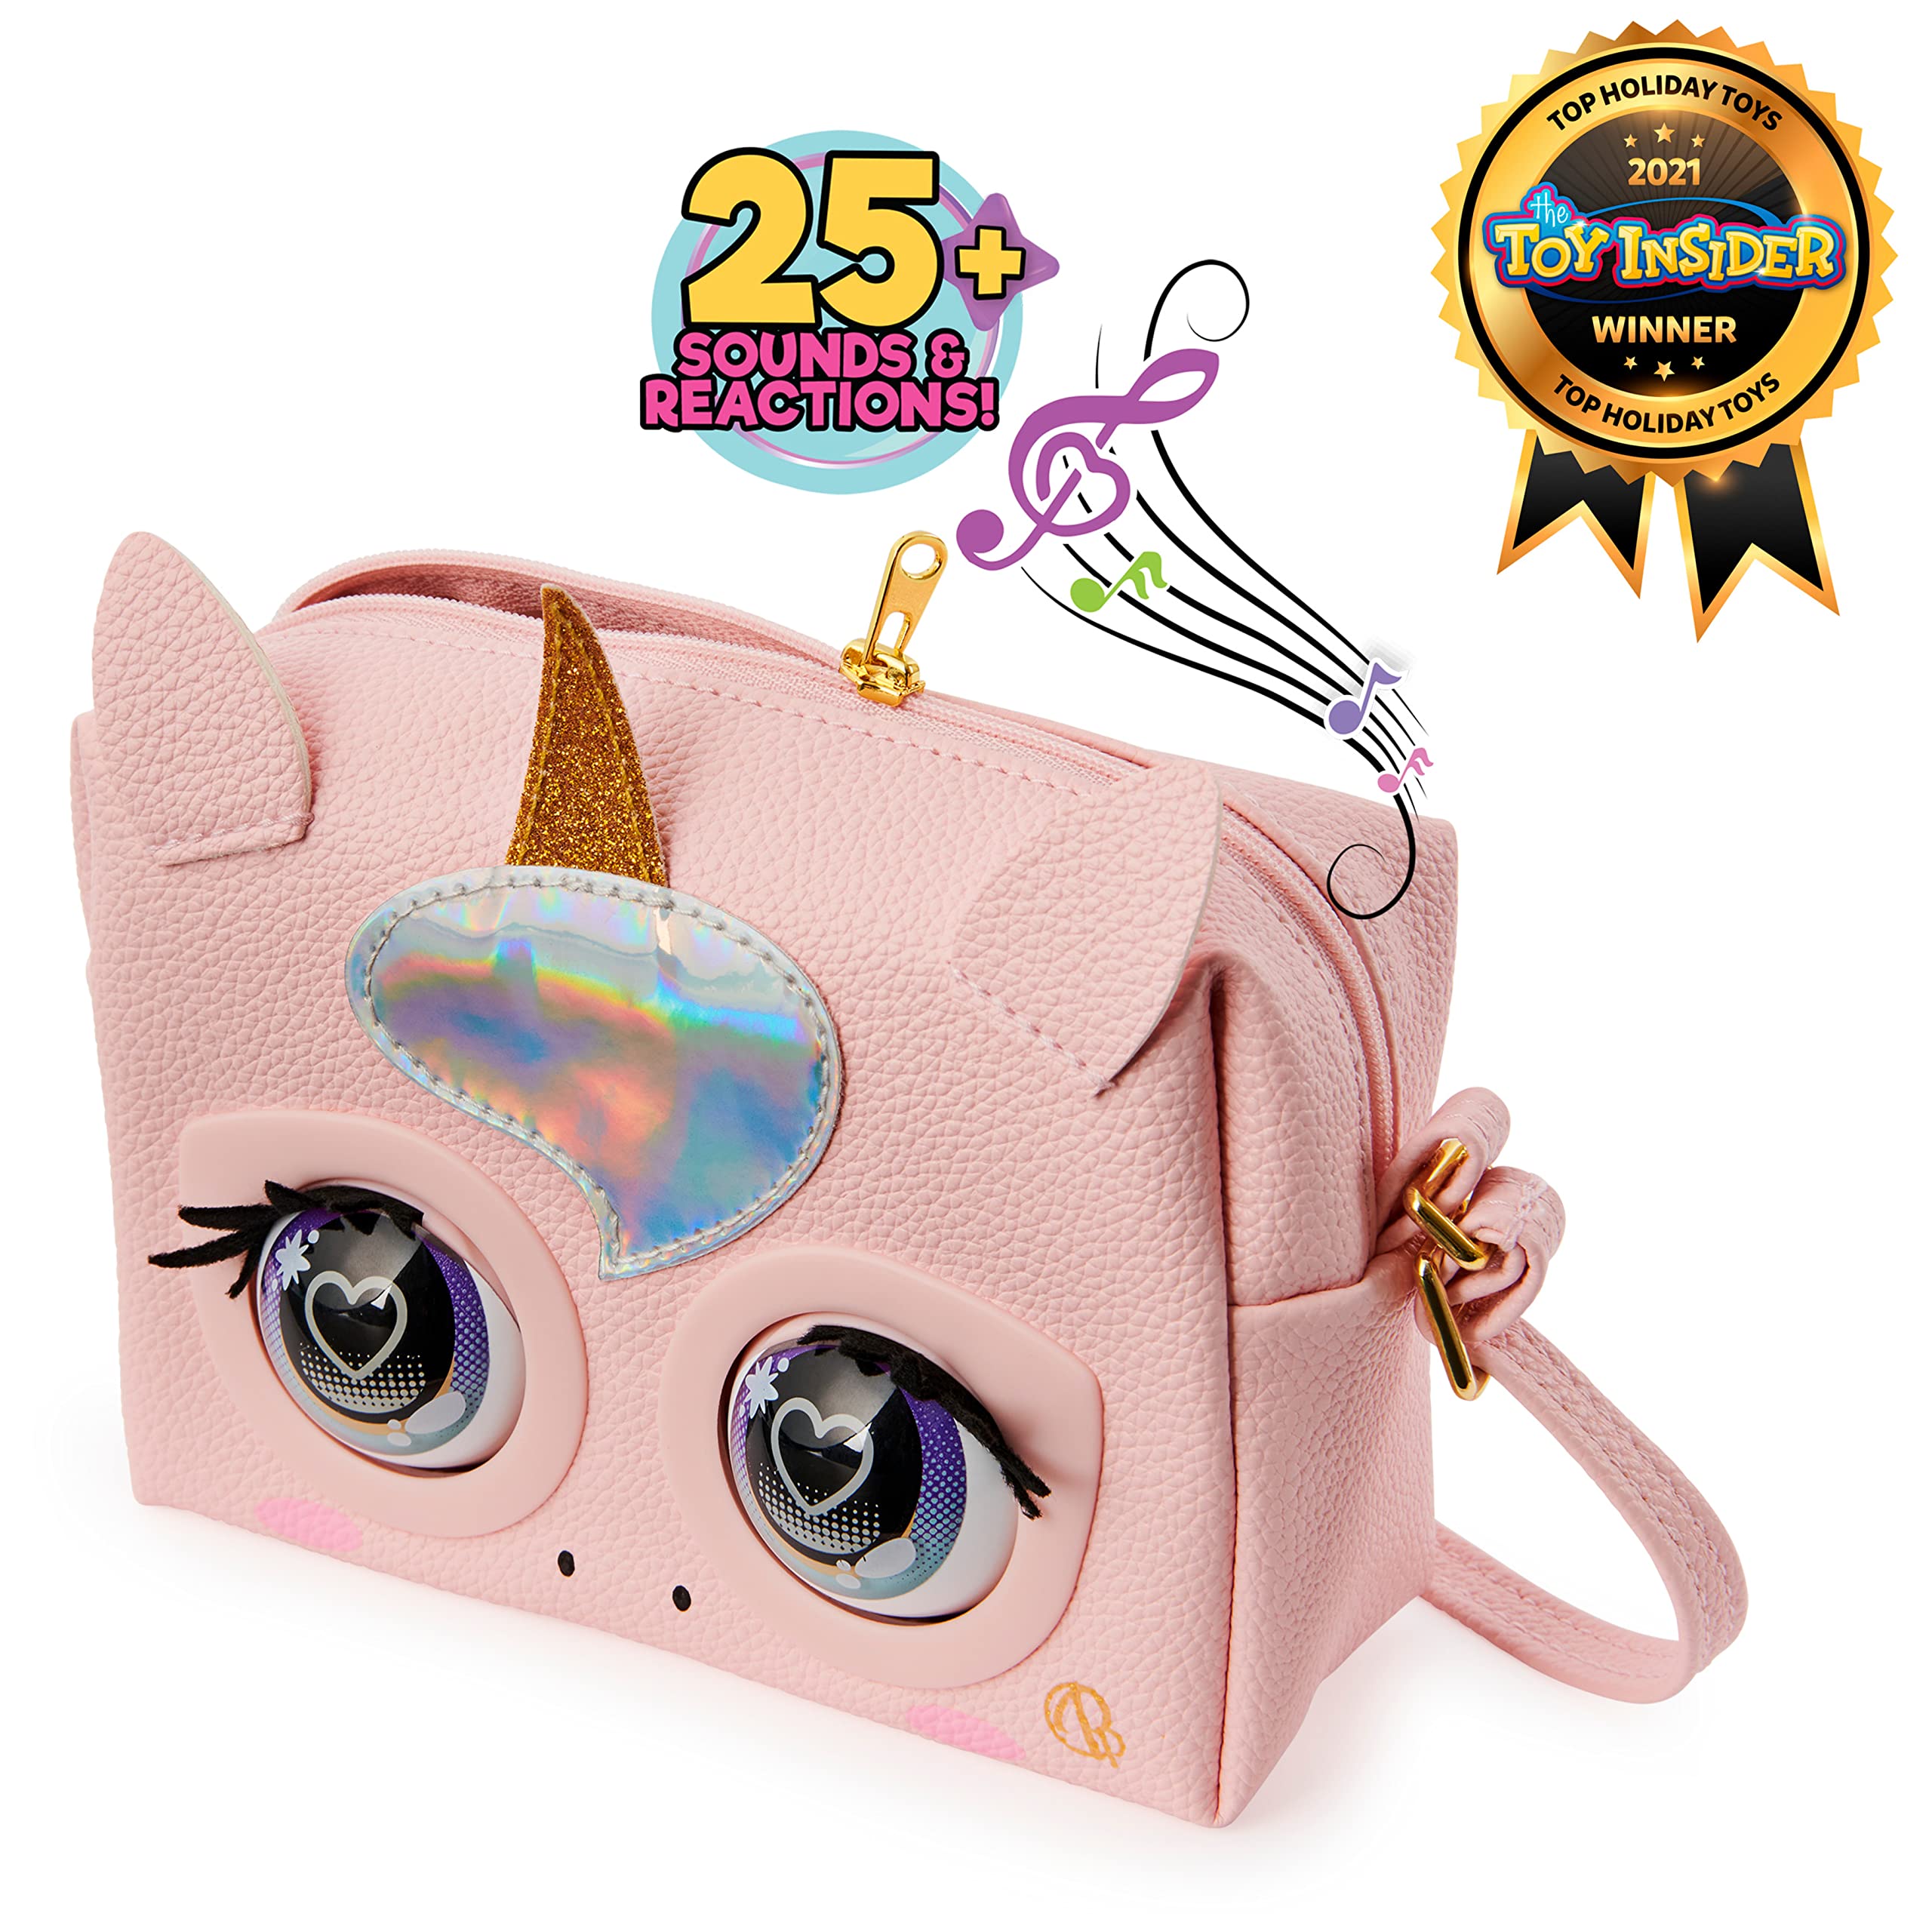 Purse Pets, Interactive Pet Toy & Kids Purse with over 30 Sounds and Reactions, Girls Crossbody Bag, Trendy Tween Gifts